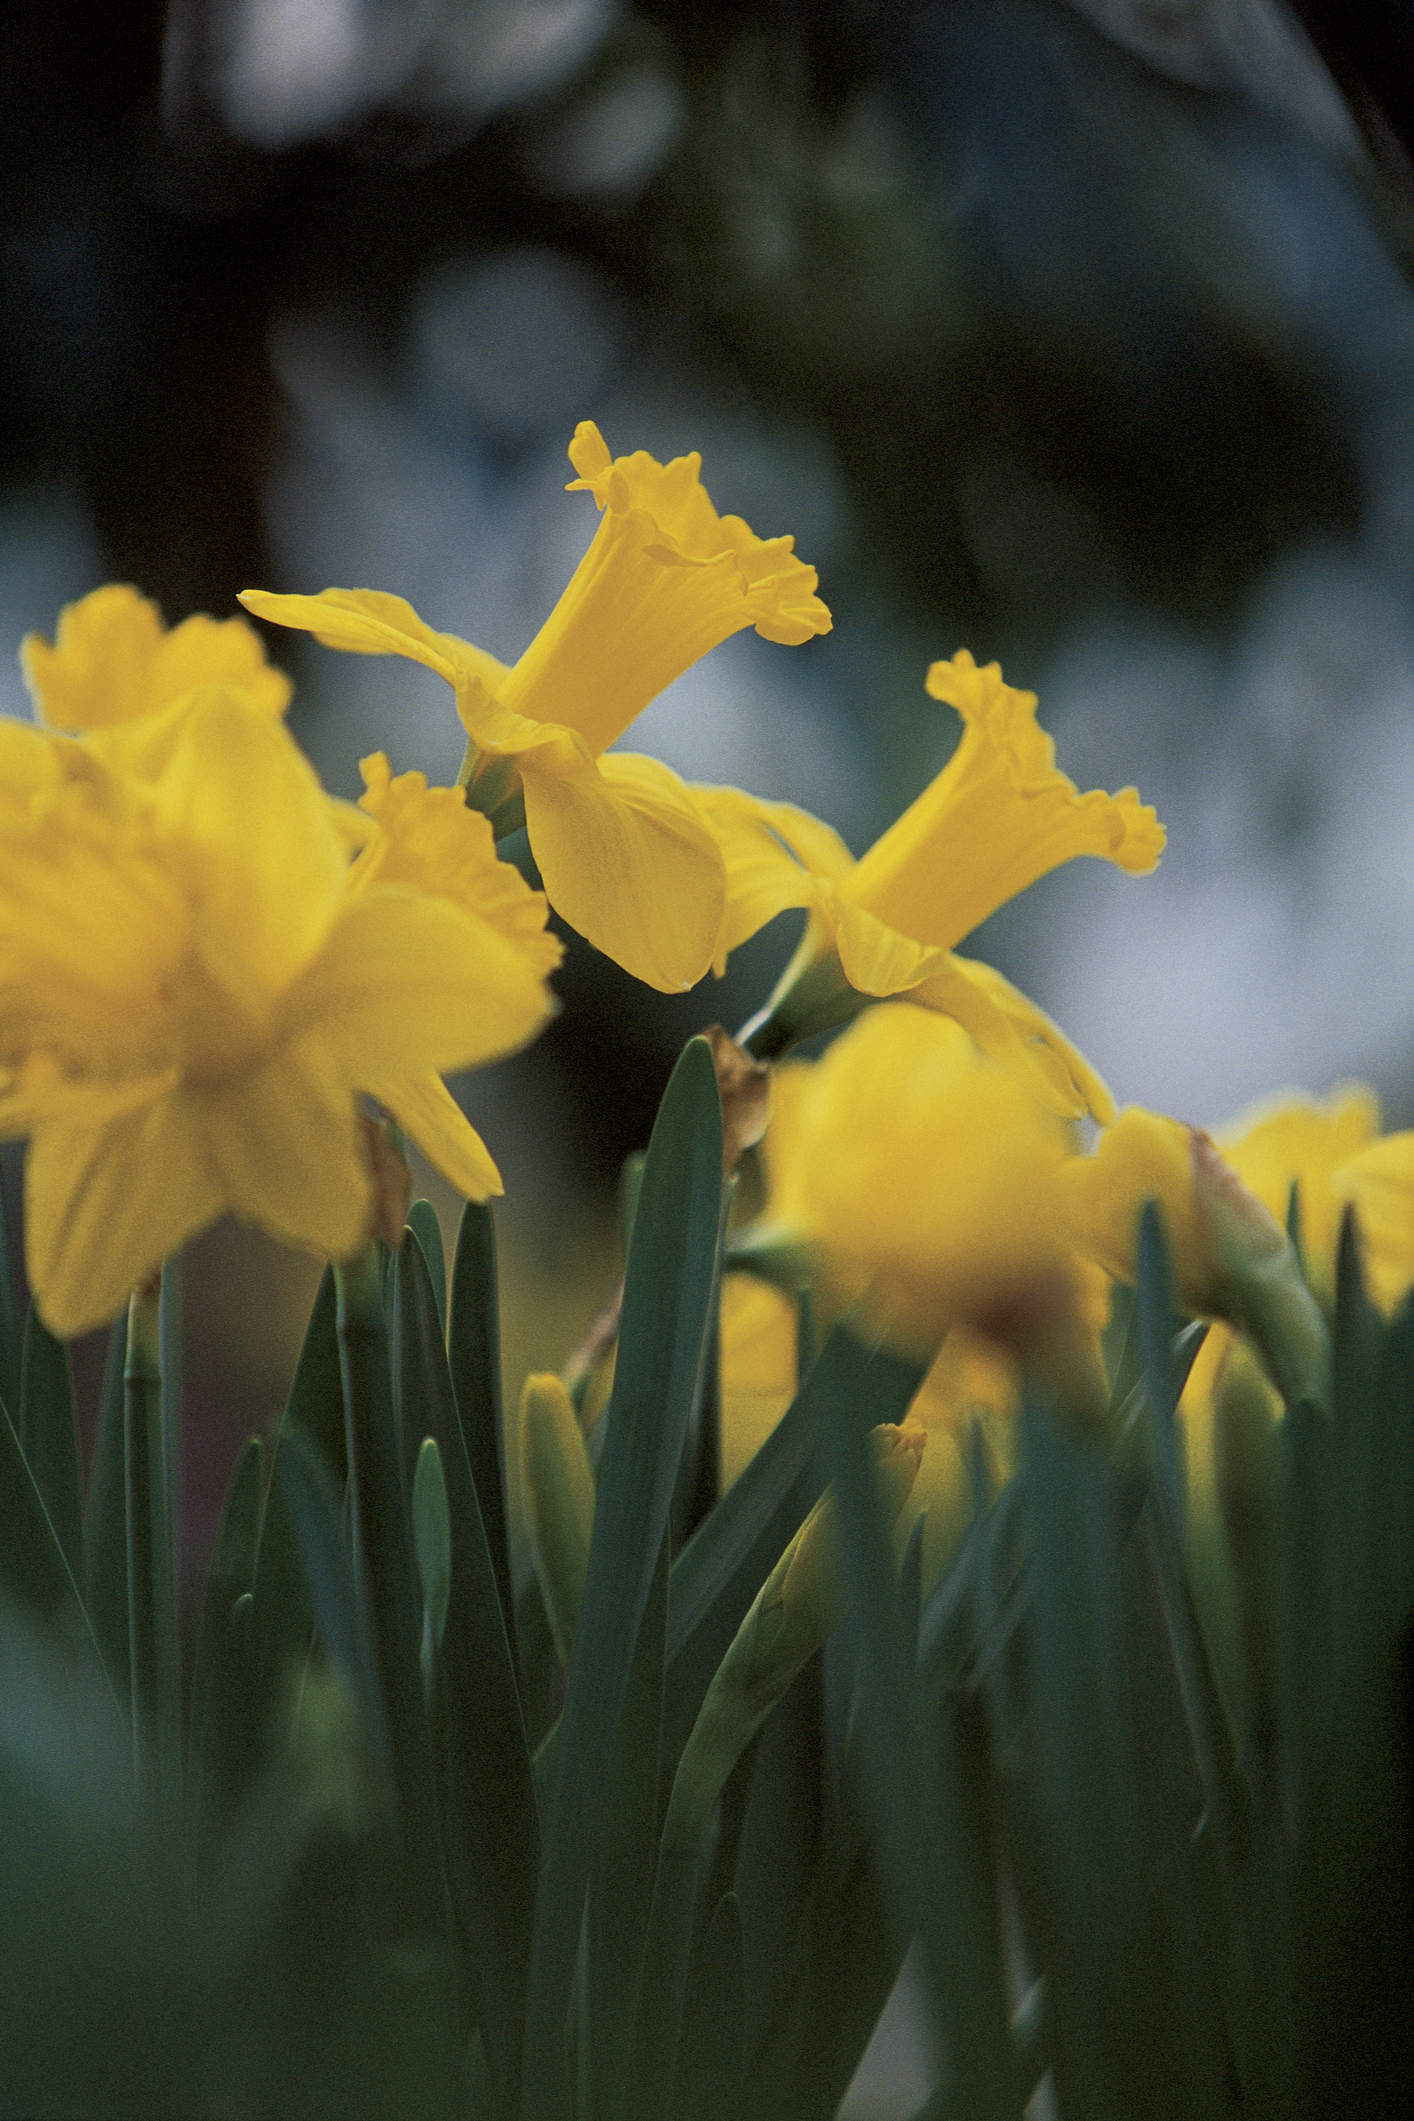 A close up image of a group of yellow daffodil flowers in field.